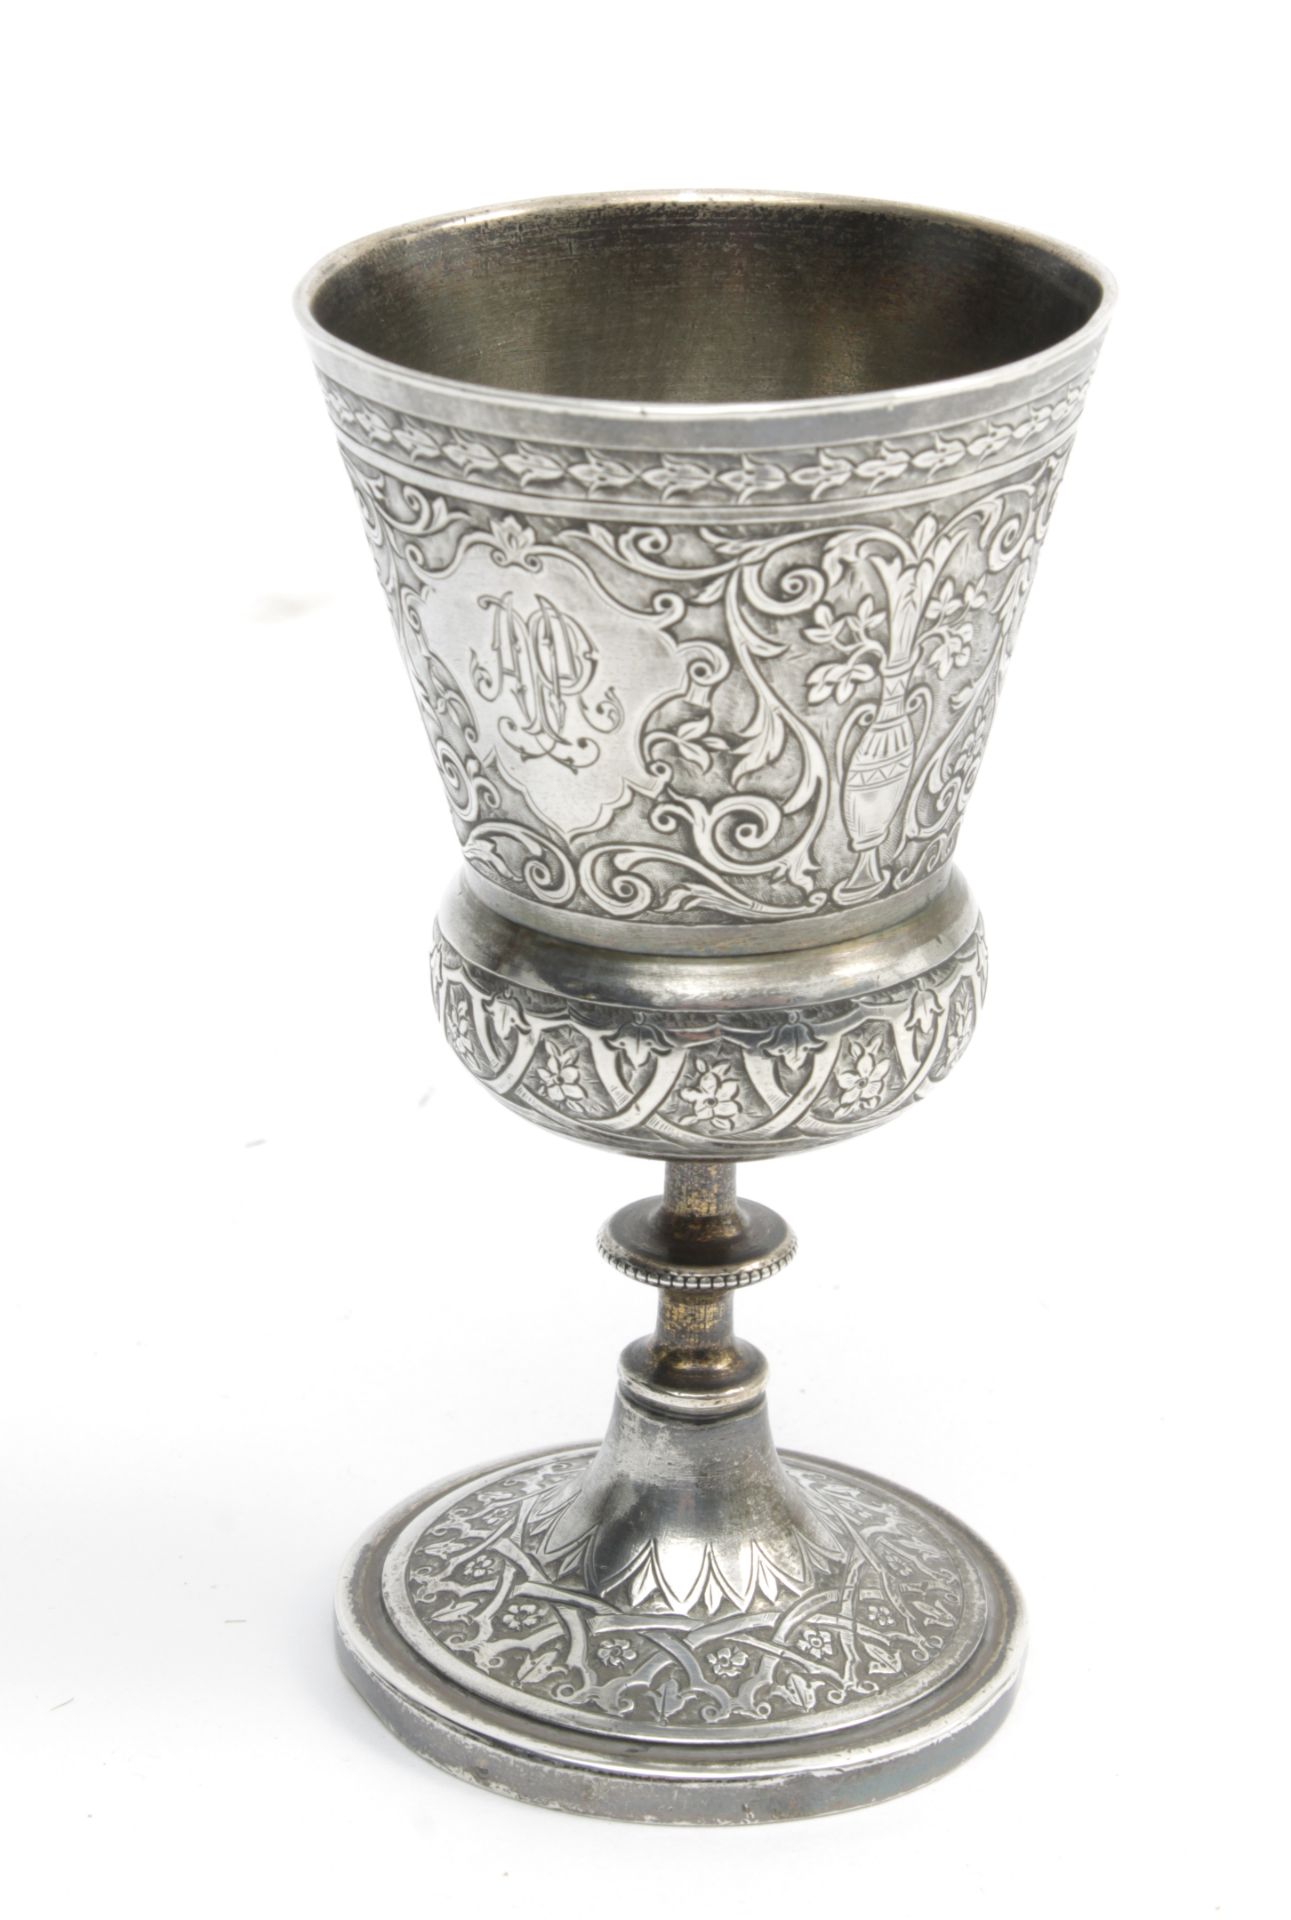 An early 20th century French liquor glass in hallmarked silver